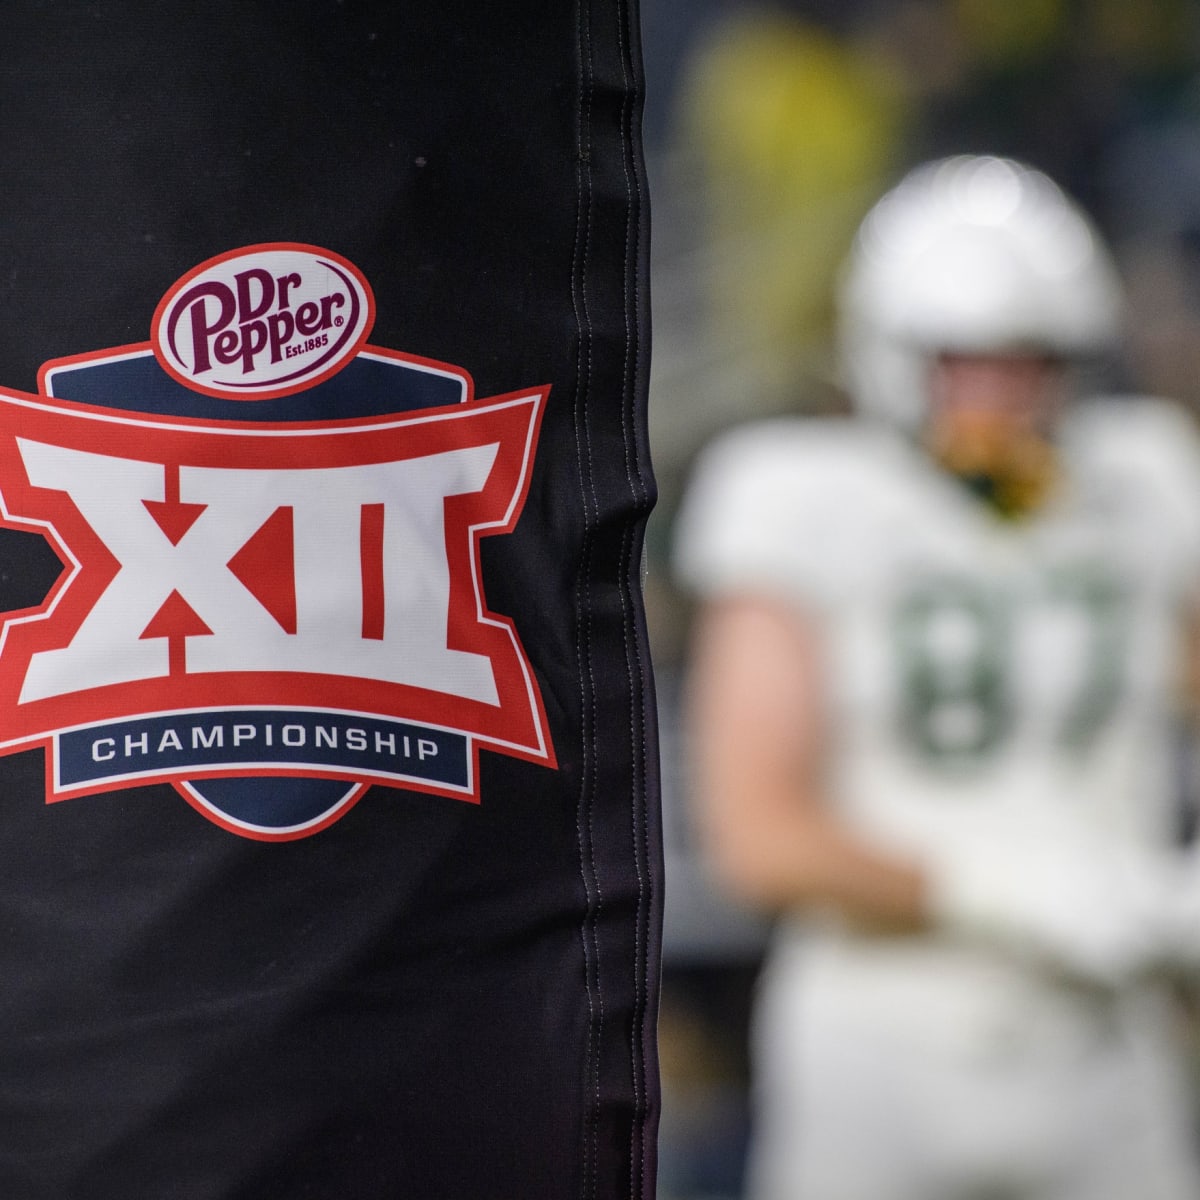 Dr Pepper Big 12 Football Championship Tickets on Sale - Big 12 Conference